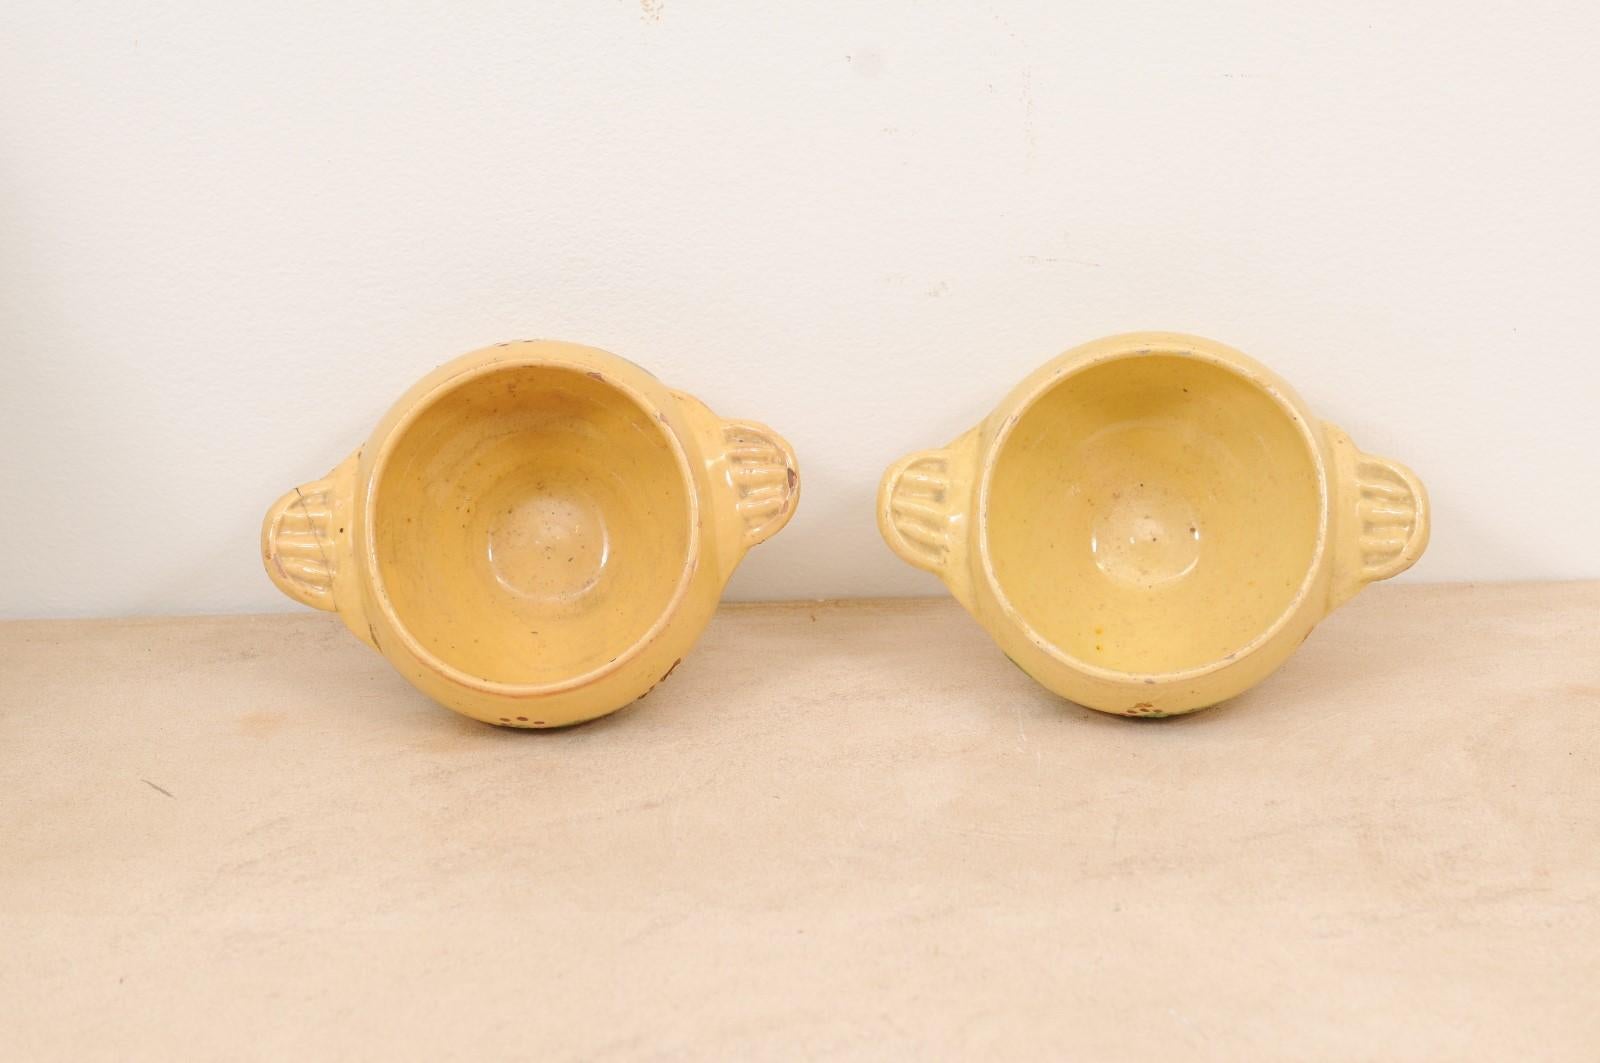 Petite 19th Century Eastern French Yellow Glazed Pottery Bowls from Innimont For Sale 6